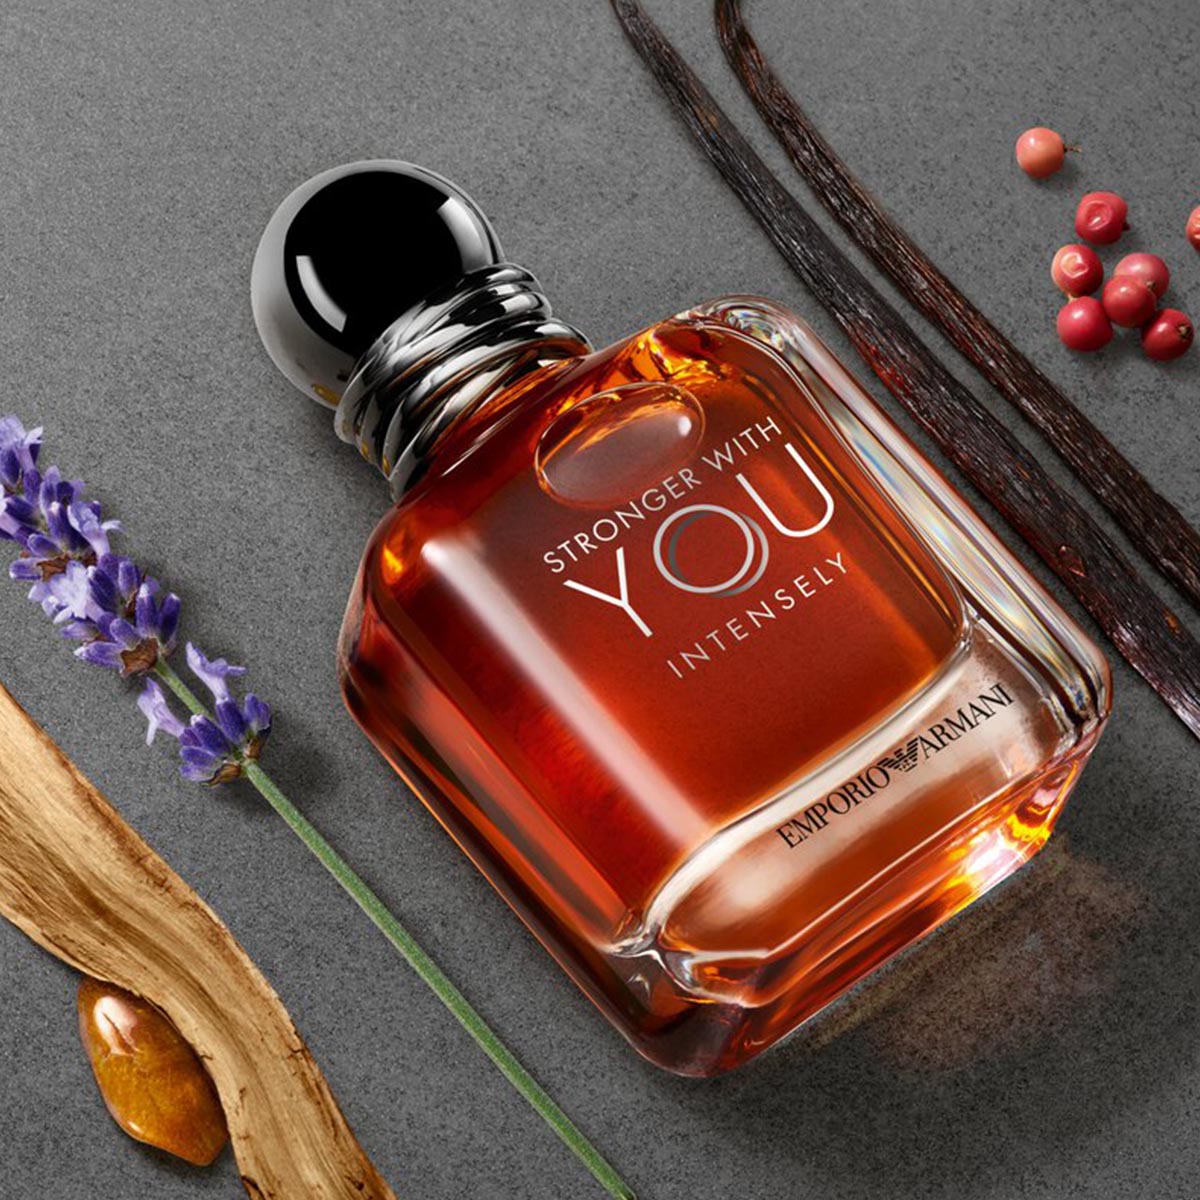 Giorgio Armani Stronger With You Intensely EDP